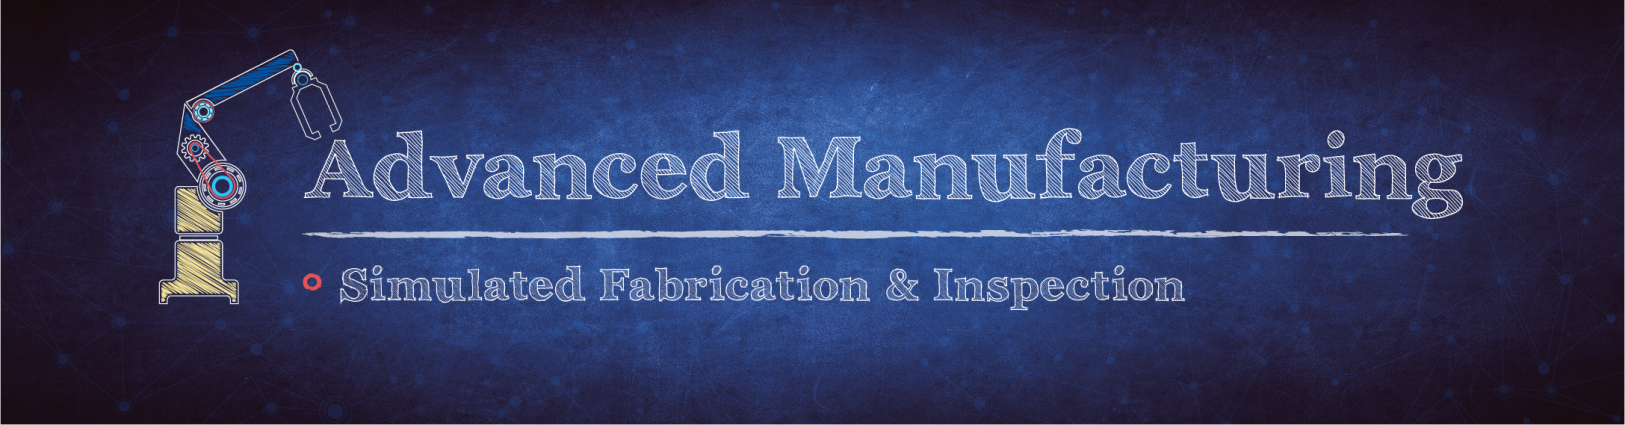 blue banner with a cartoon image of a robotic manufacturing arm and text overlay: "Advanced Manufacturing: Simulated Fabrication and Inspection"